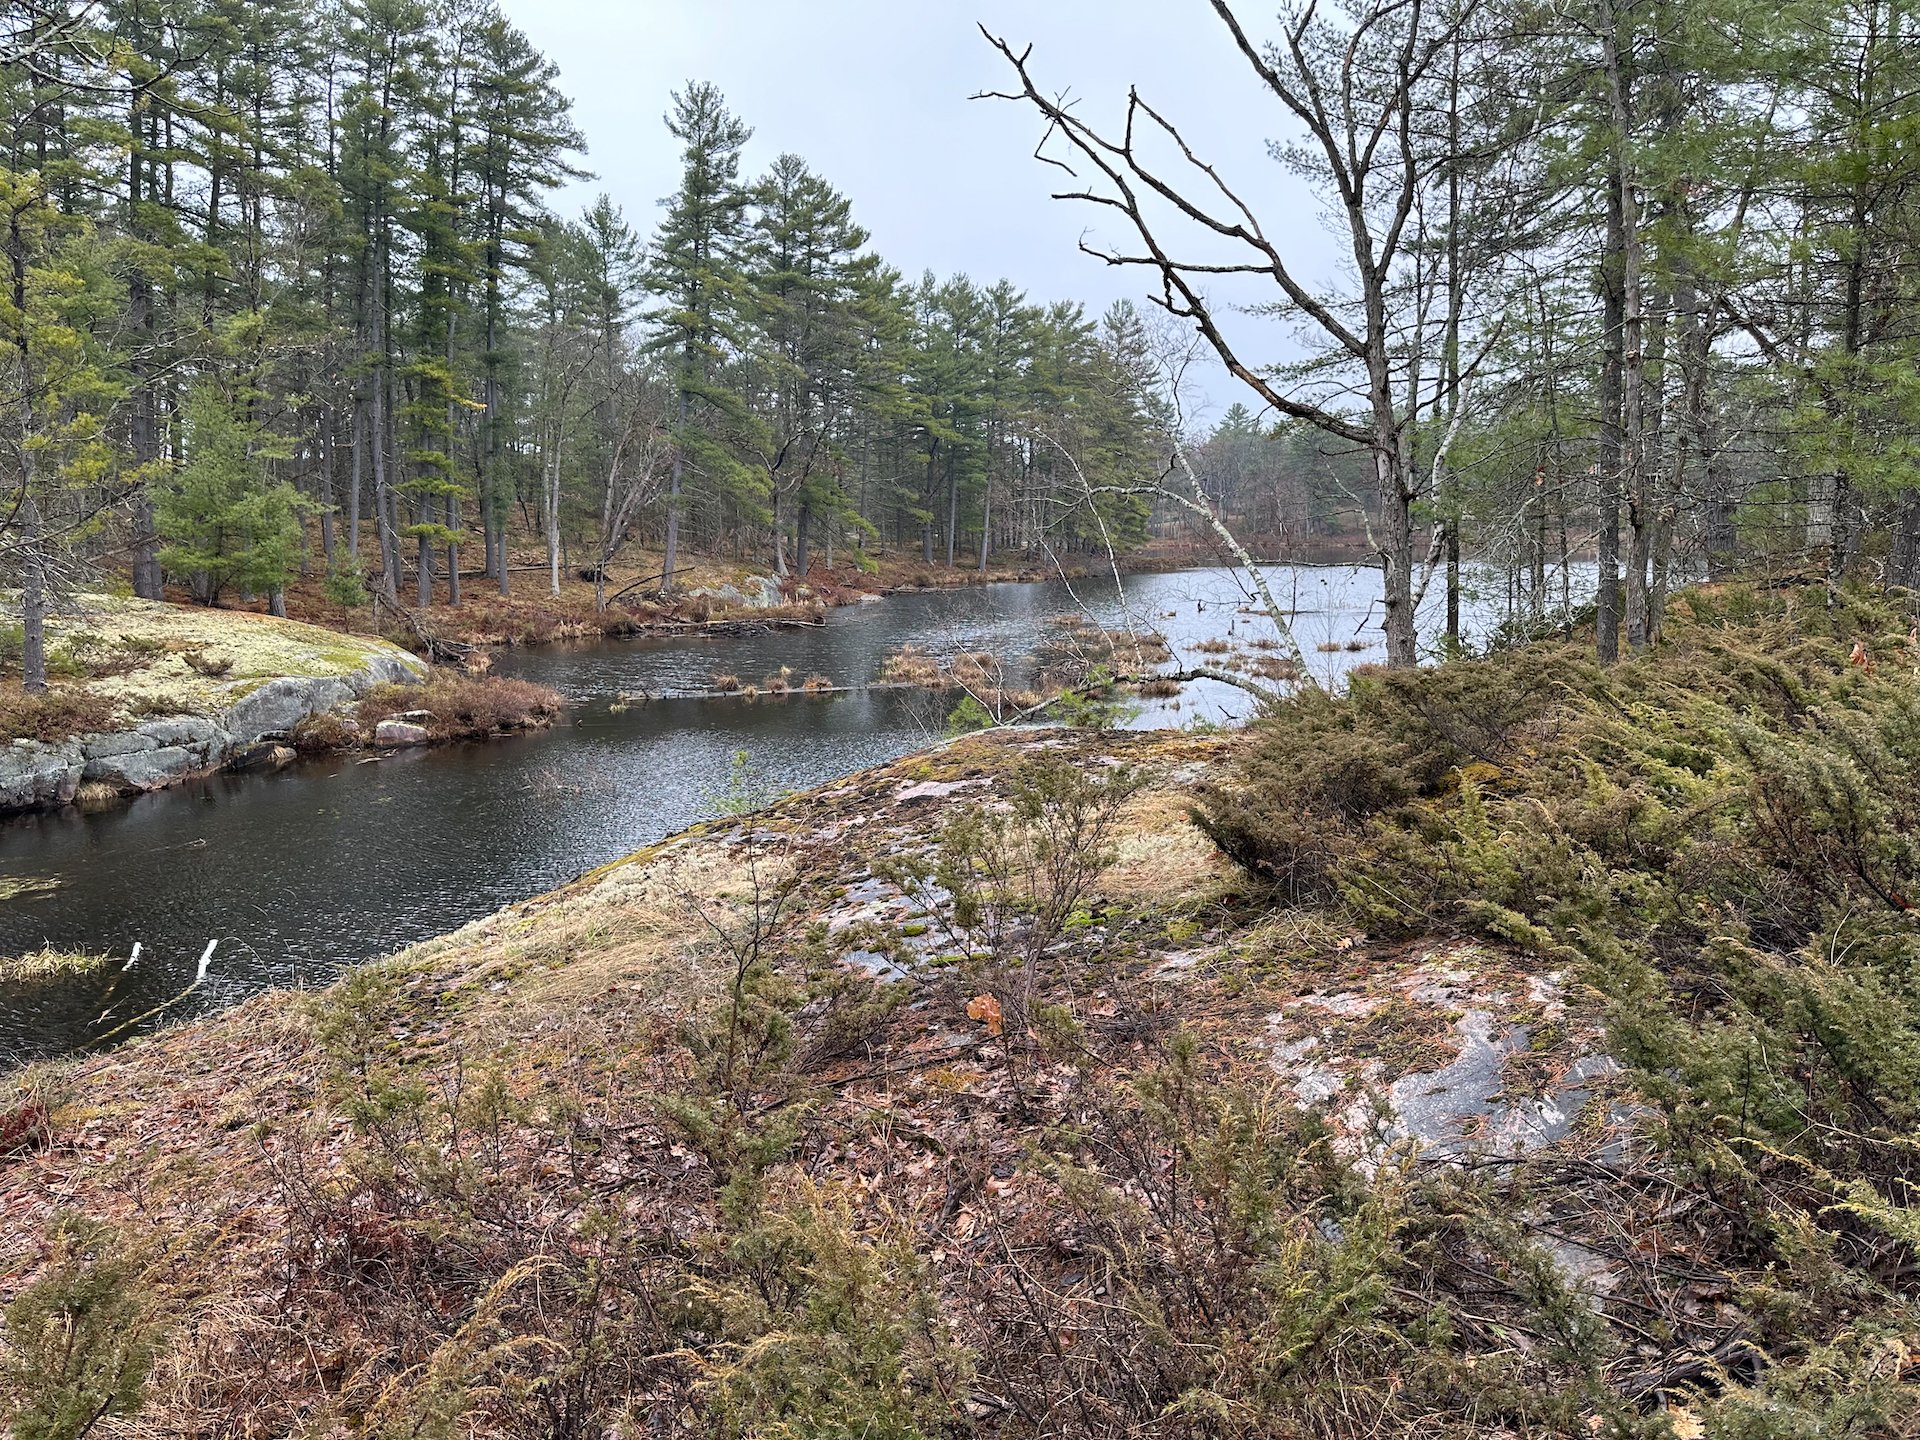  A couple of pics from the walk. Not too exciting, but such typical Ontario cottage country. Winter was coming to an end and you could tell that spring was ready to burst forth. 